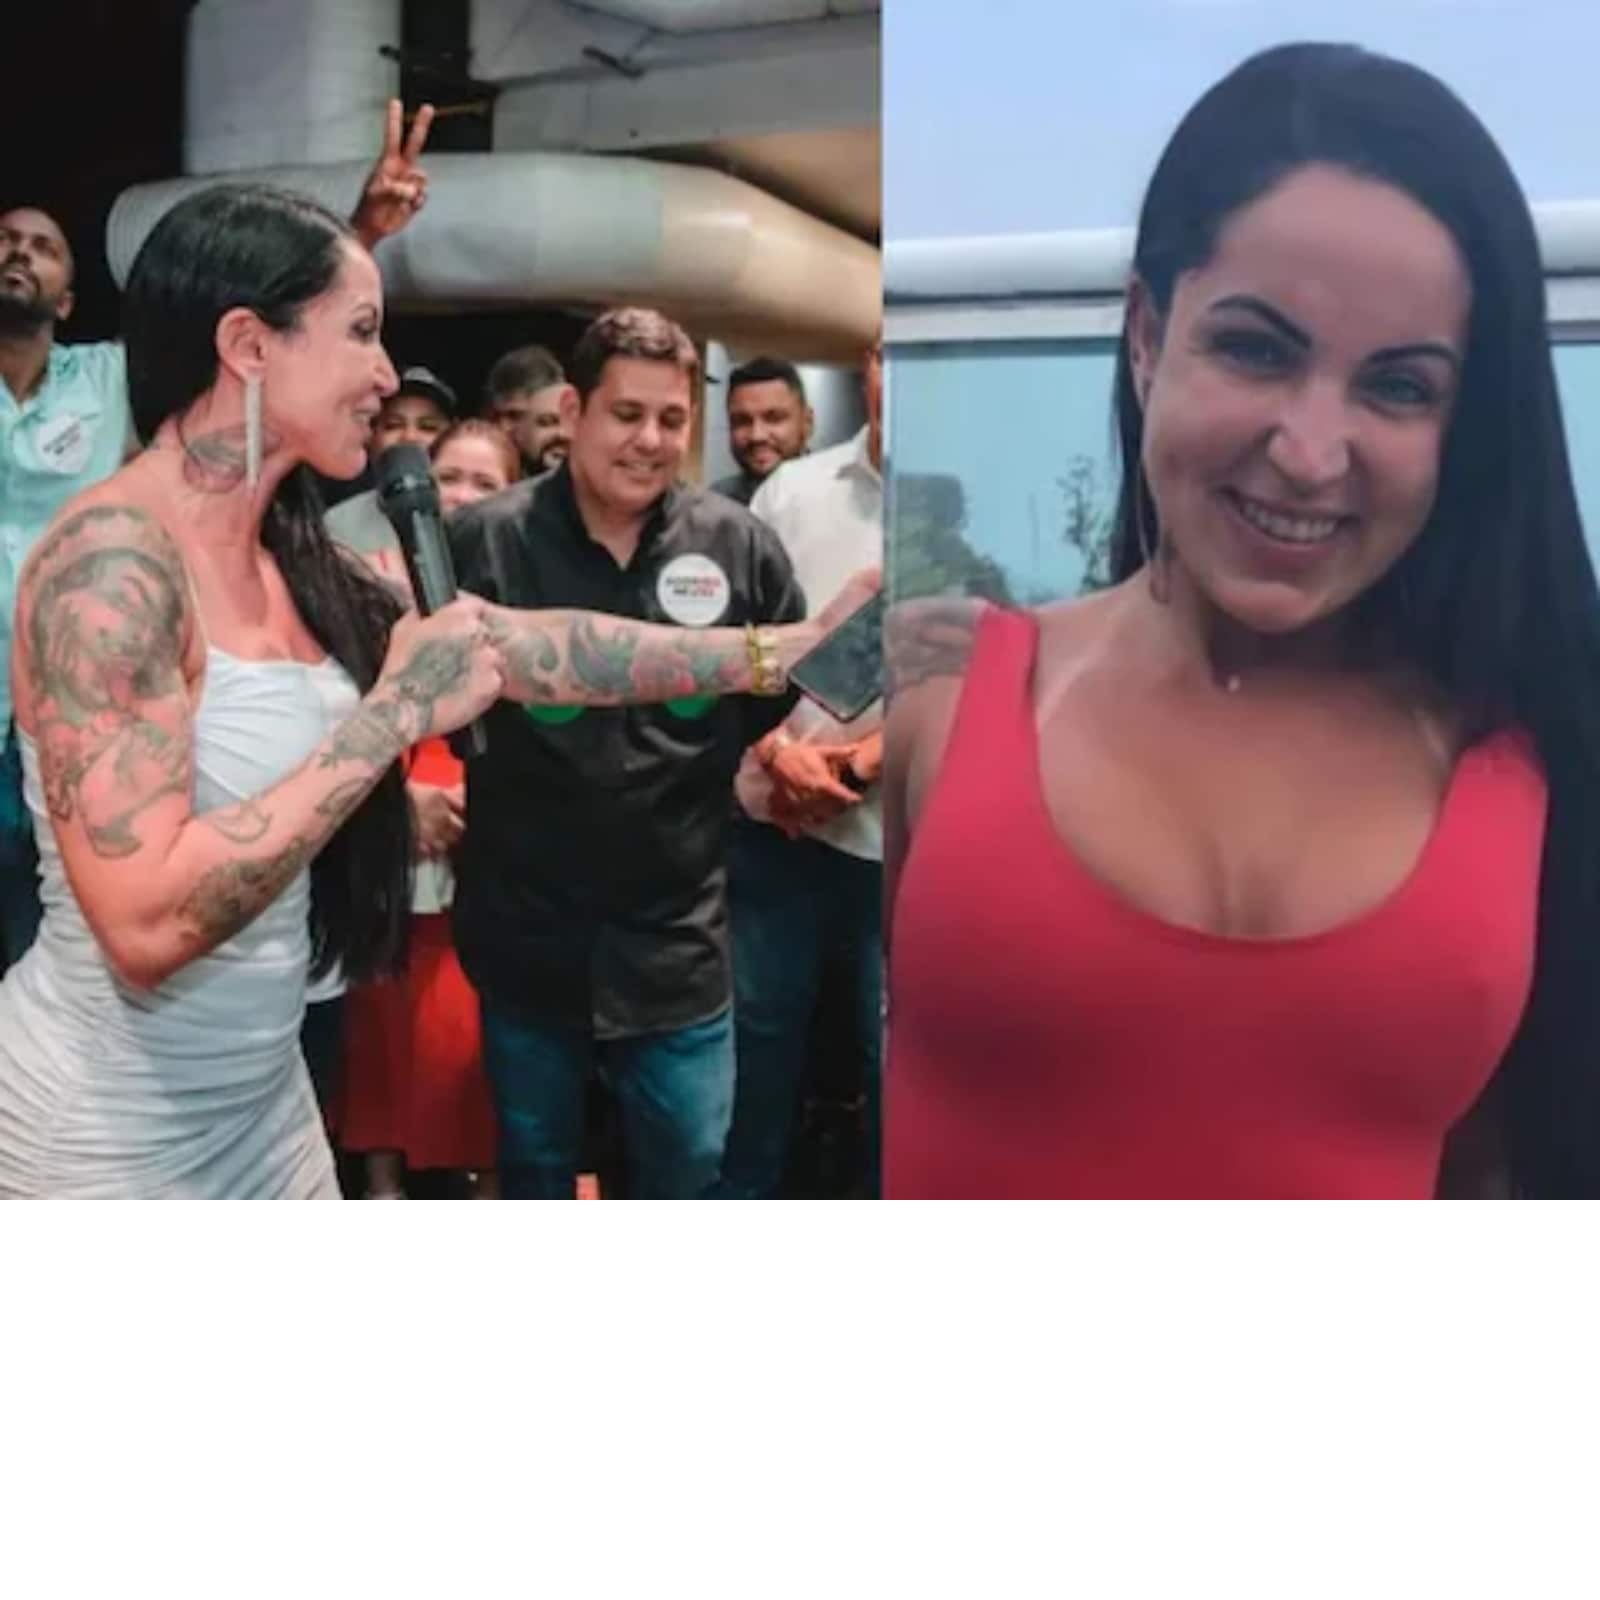 Brazil Girls Porn - Ex-Adult Film Star to Run For Brazil Parliamentary Elections, Women Rights  on Agenda